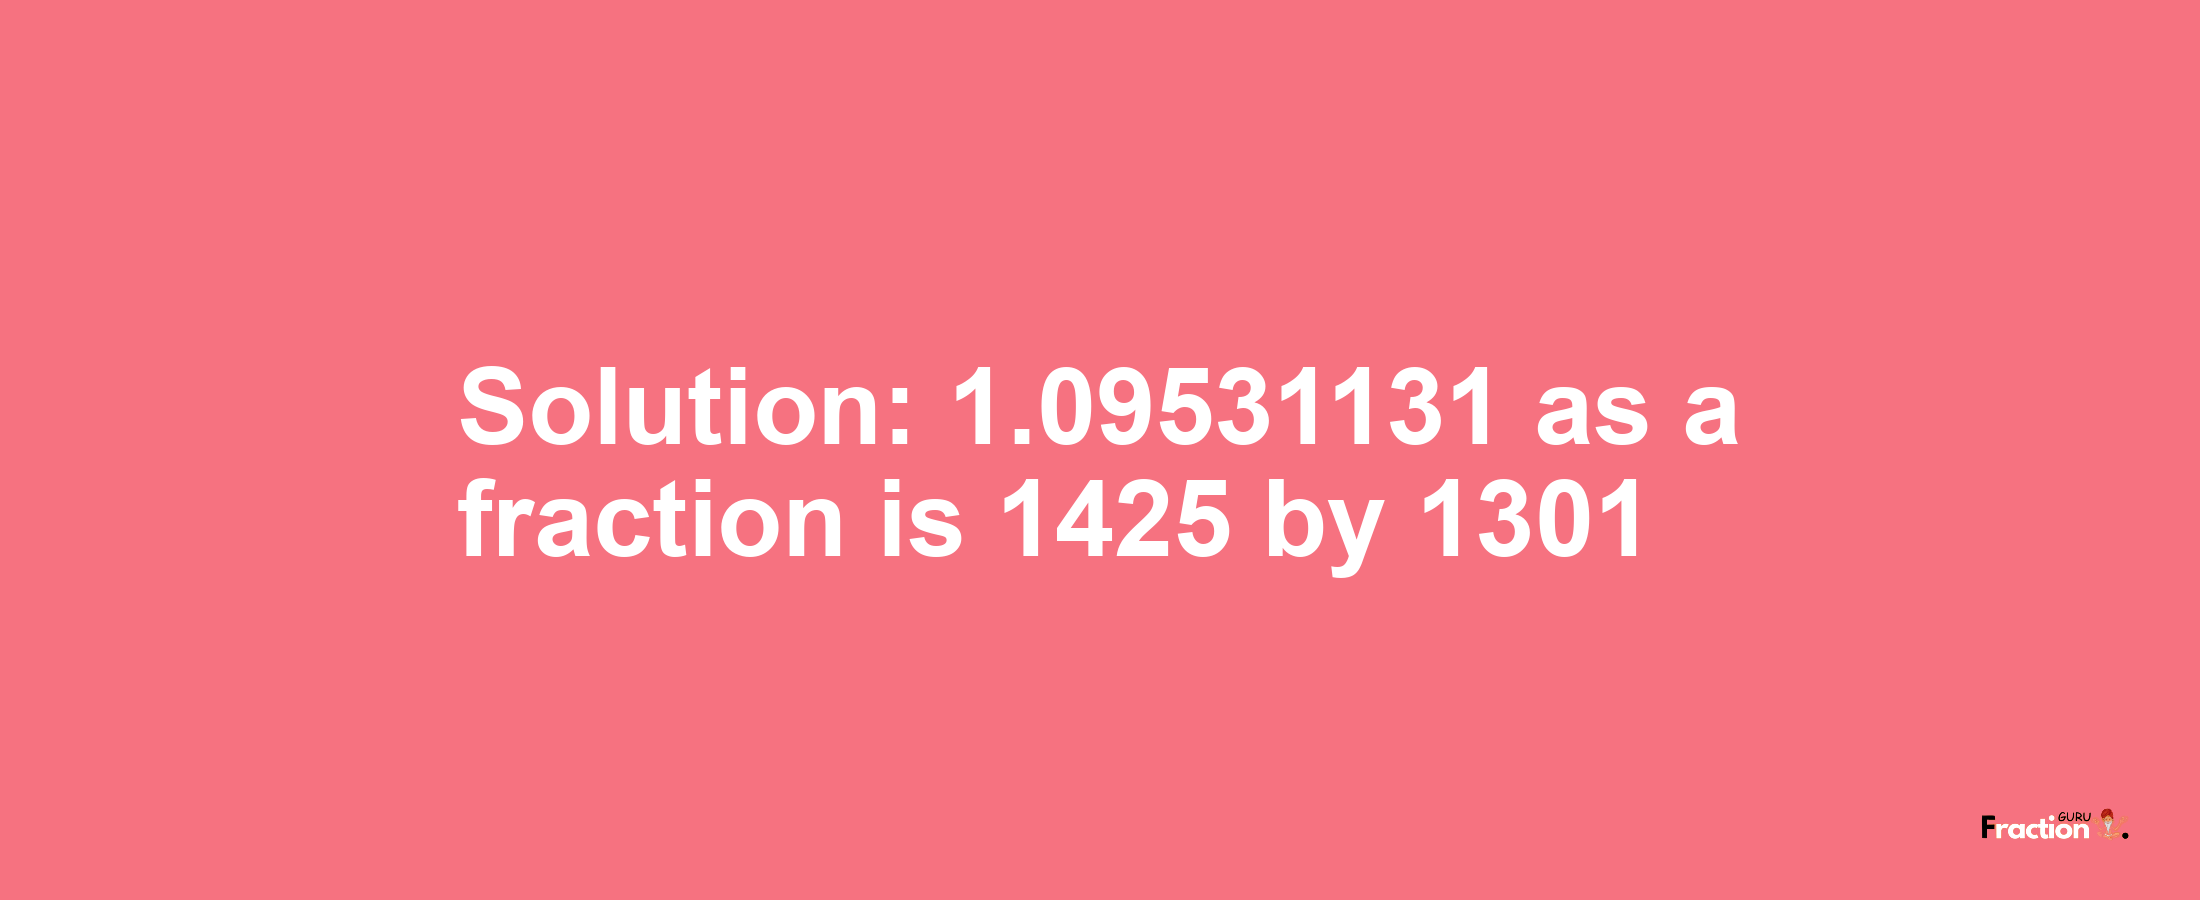 Solution:1.09531131 as a fraction is 1425/1301